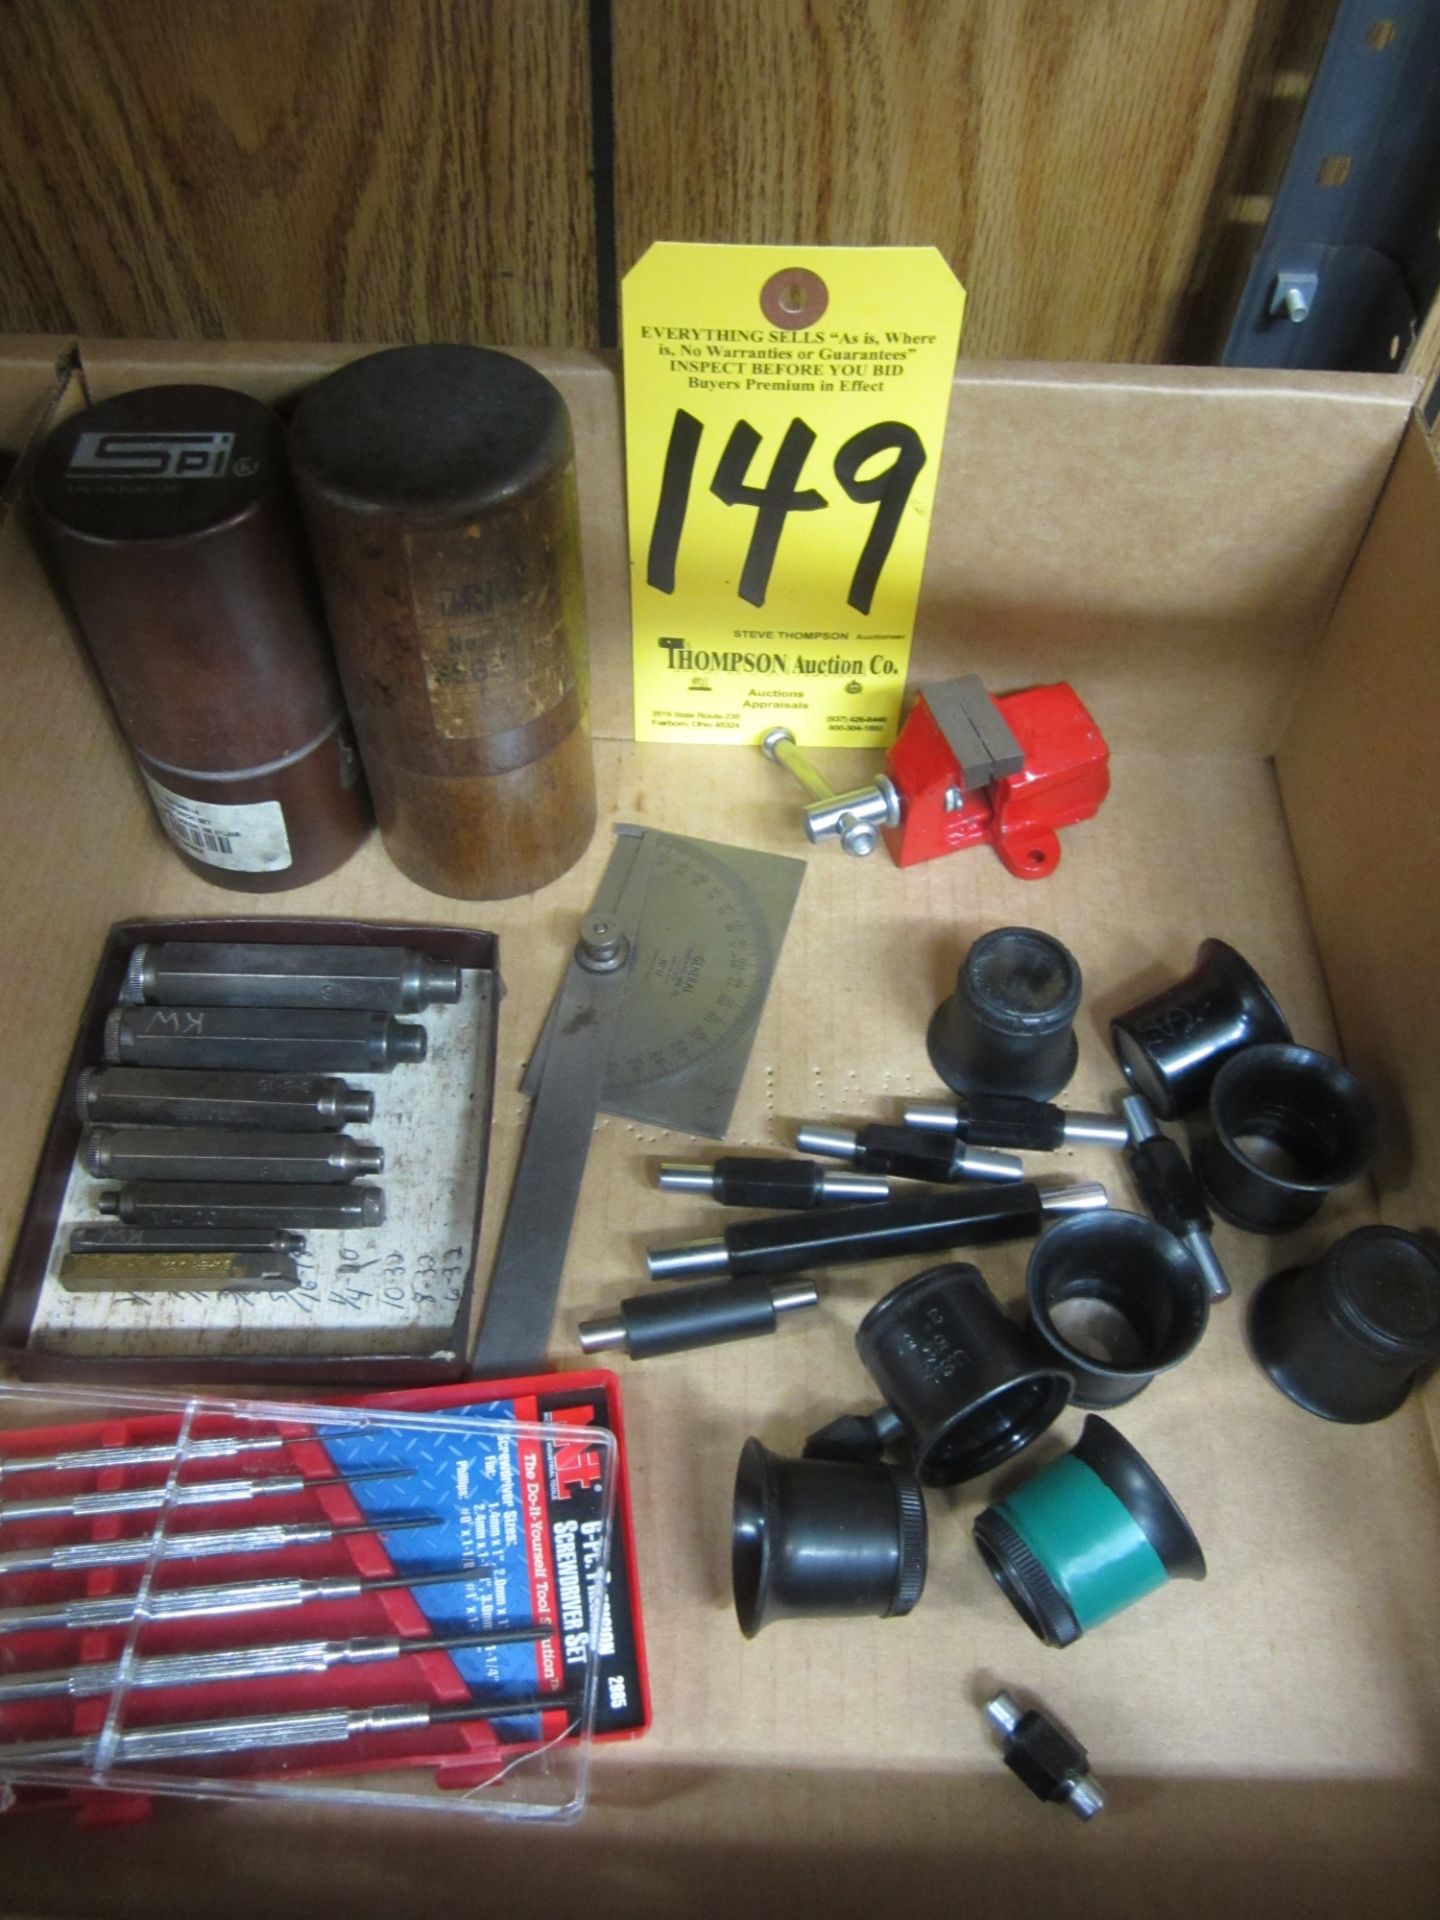 Punchs, Transfer Punches, Magnefiers, Etc.